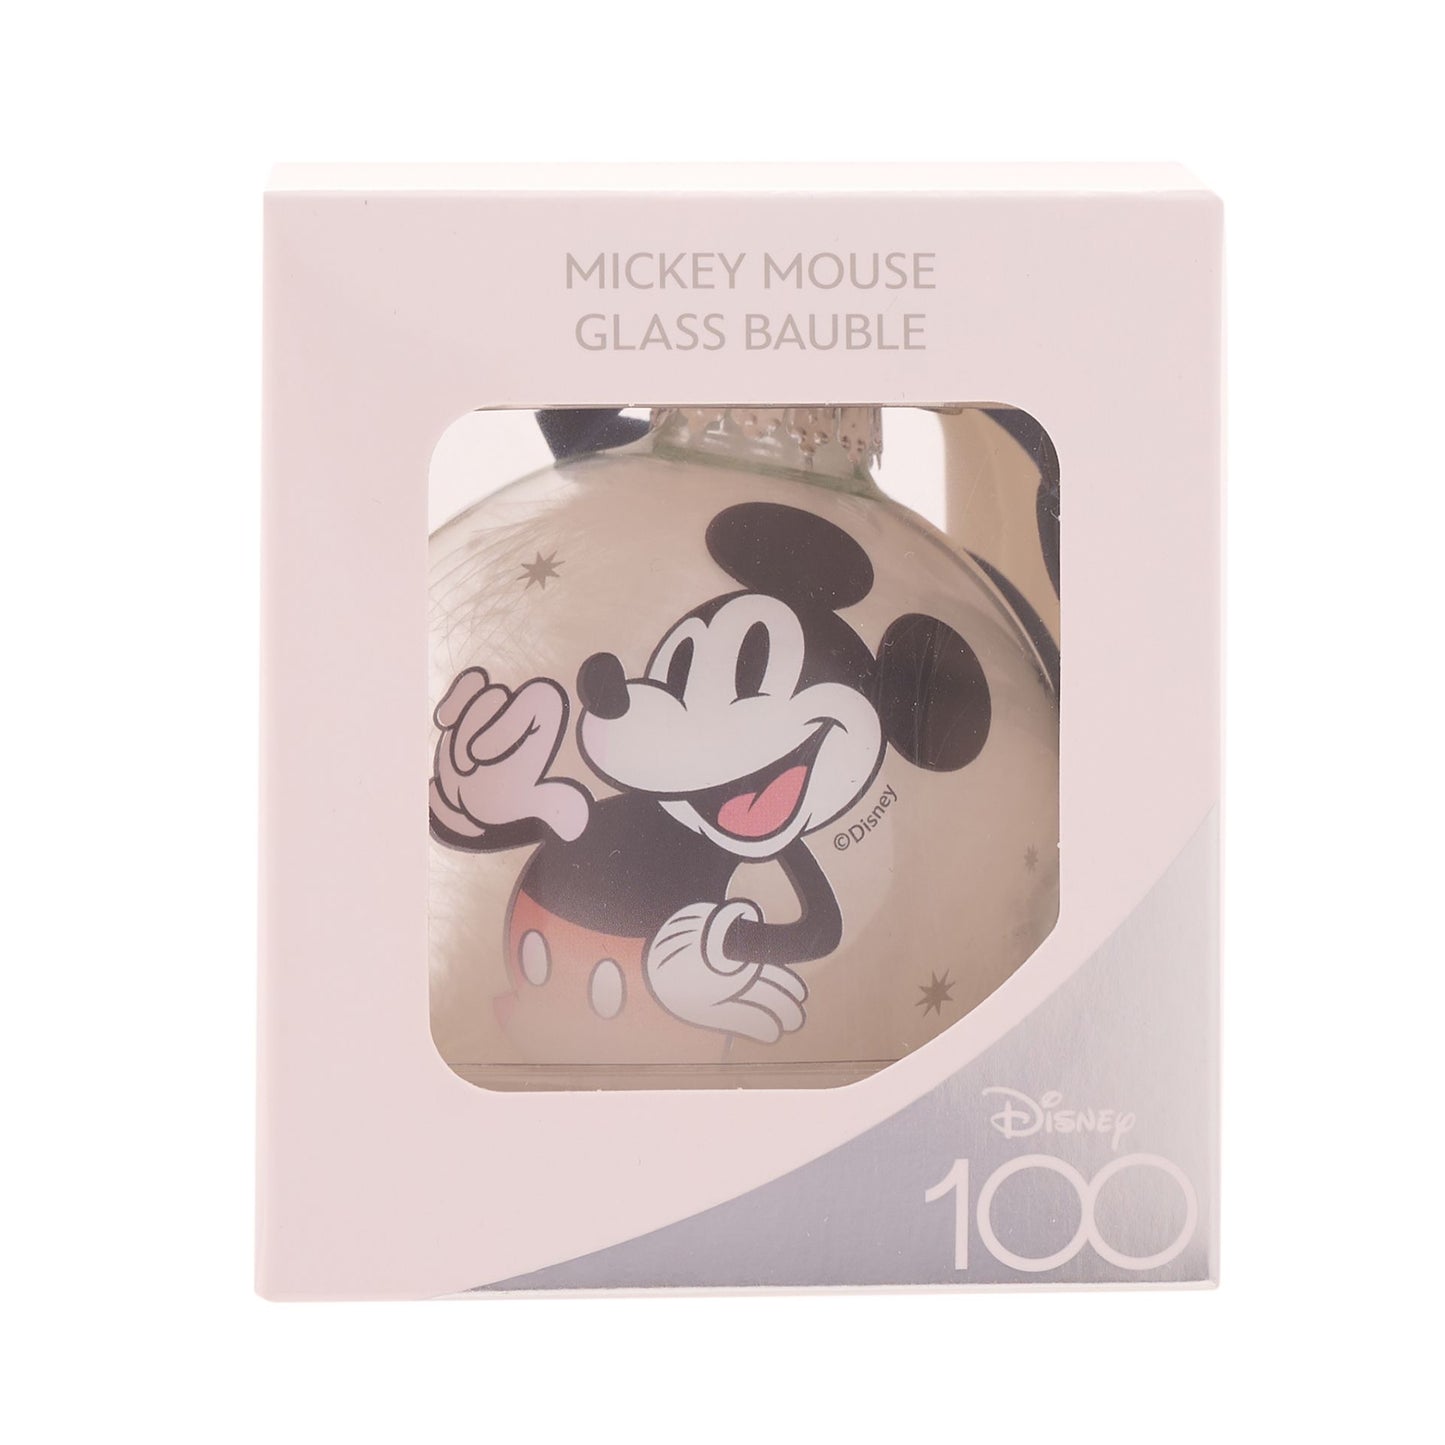 Disney 100 Mickey Mouse Kerstbal